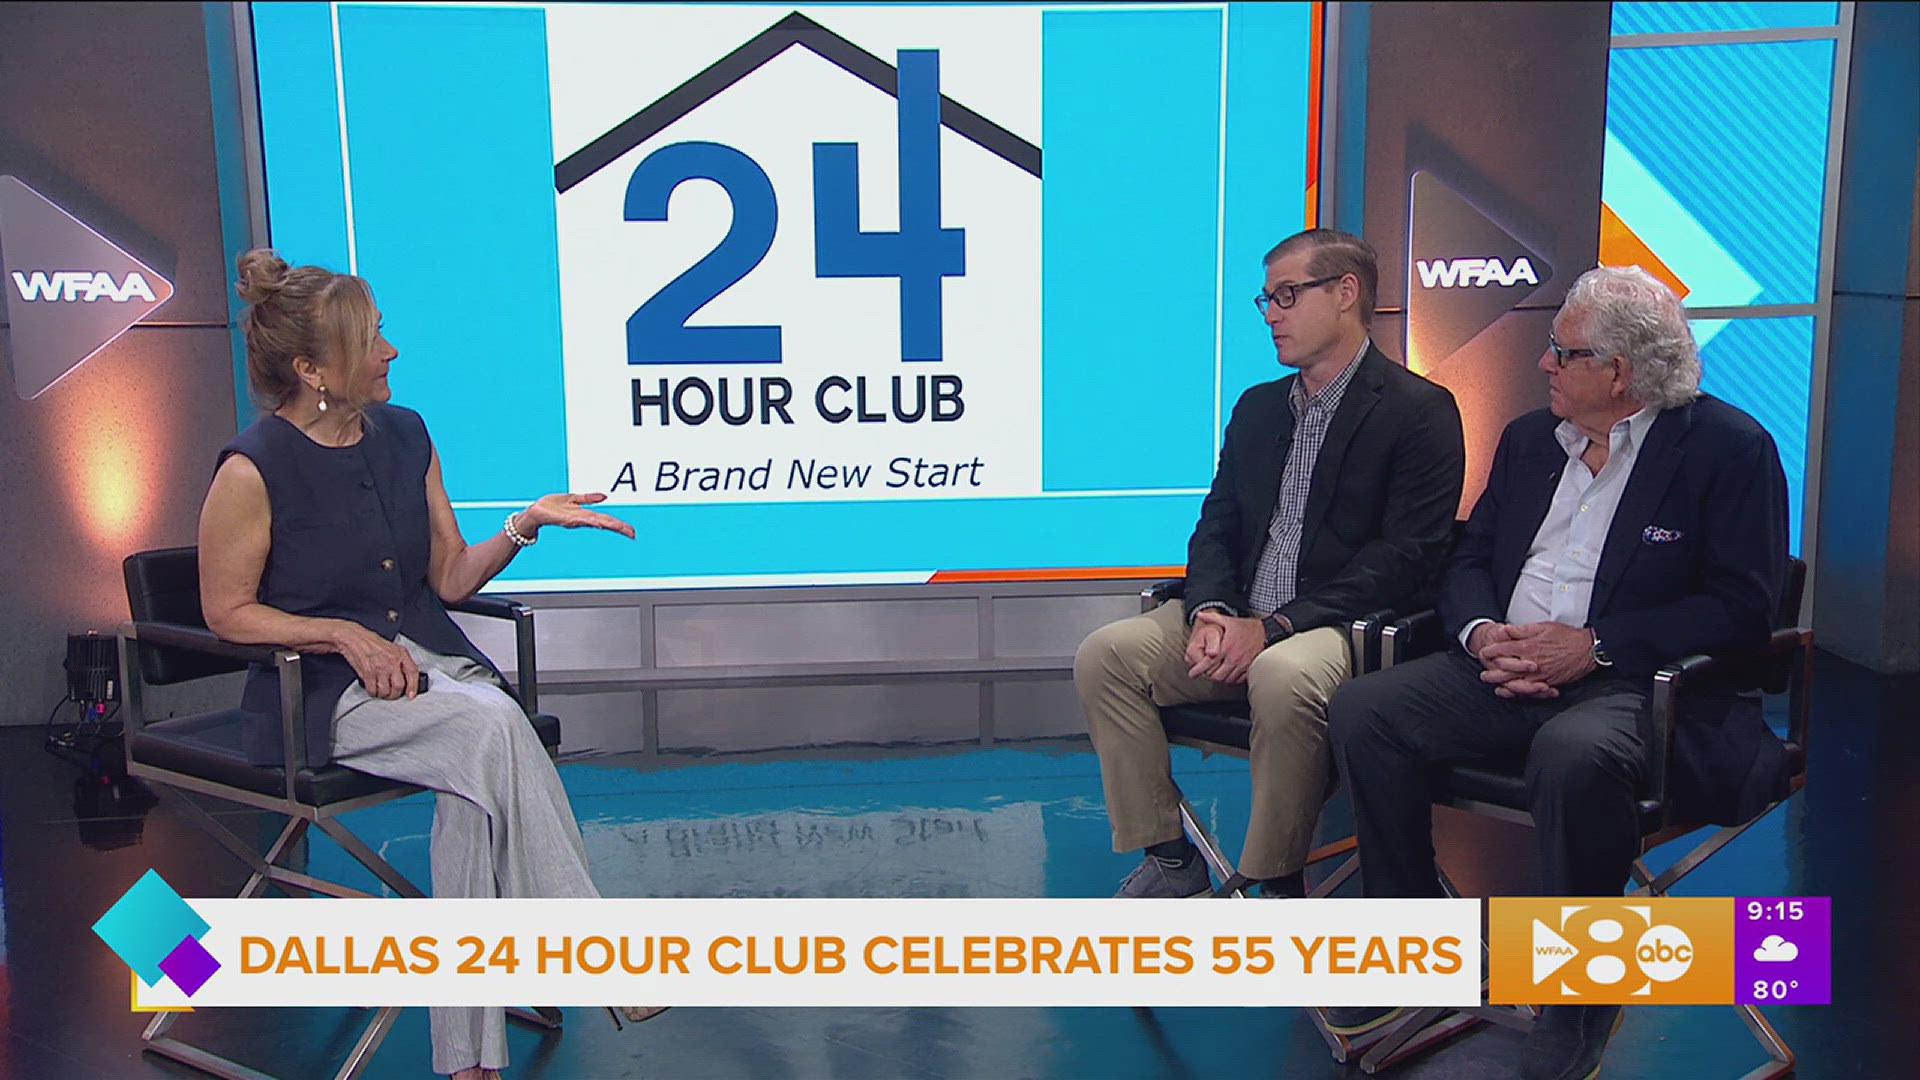 Dallas 24 Hour Club CEO Tim Grigsby and Chairman of the Board of Directors Michael Young tell us how their celebrating 55 years.